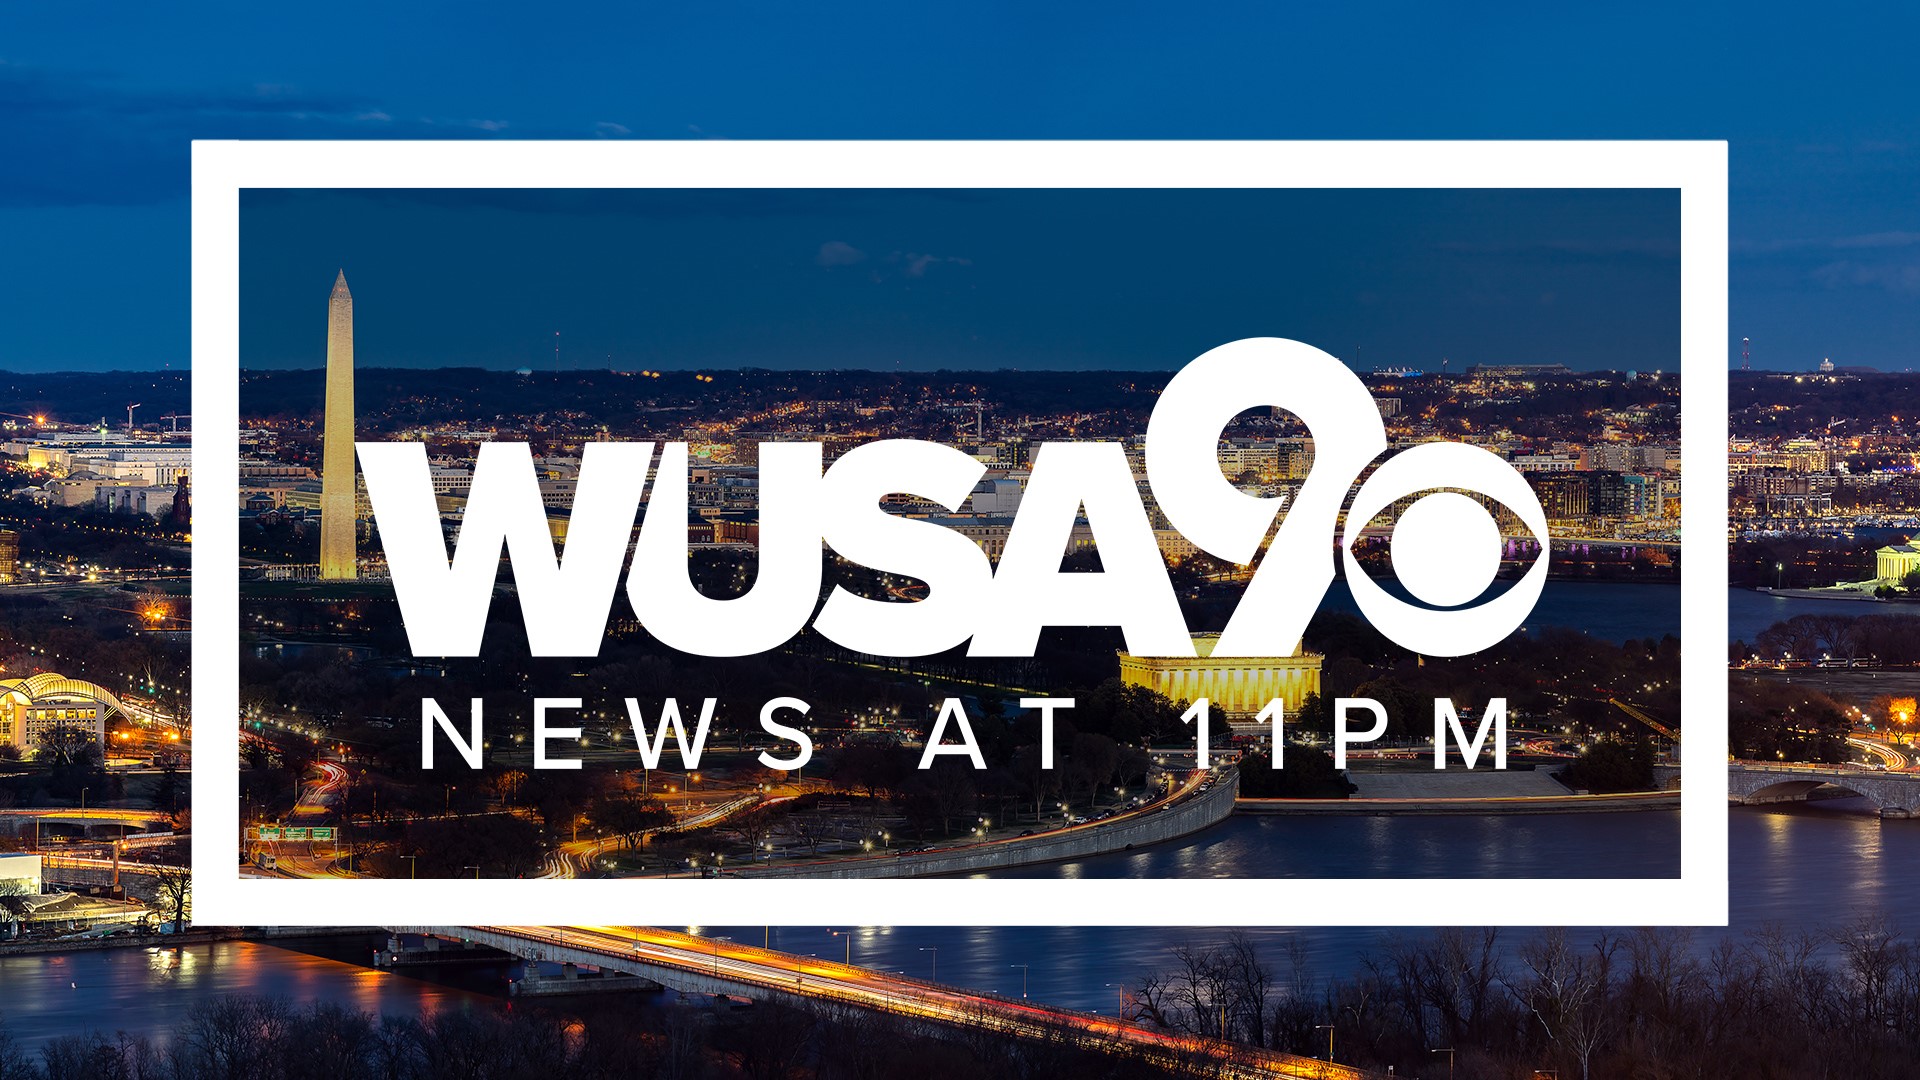 The WUSA9 News Team presents an evening newscast featuring breaking news, local and national events, with the most-accurate weather from around Washington, D.C.